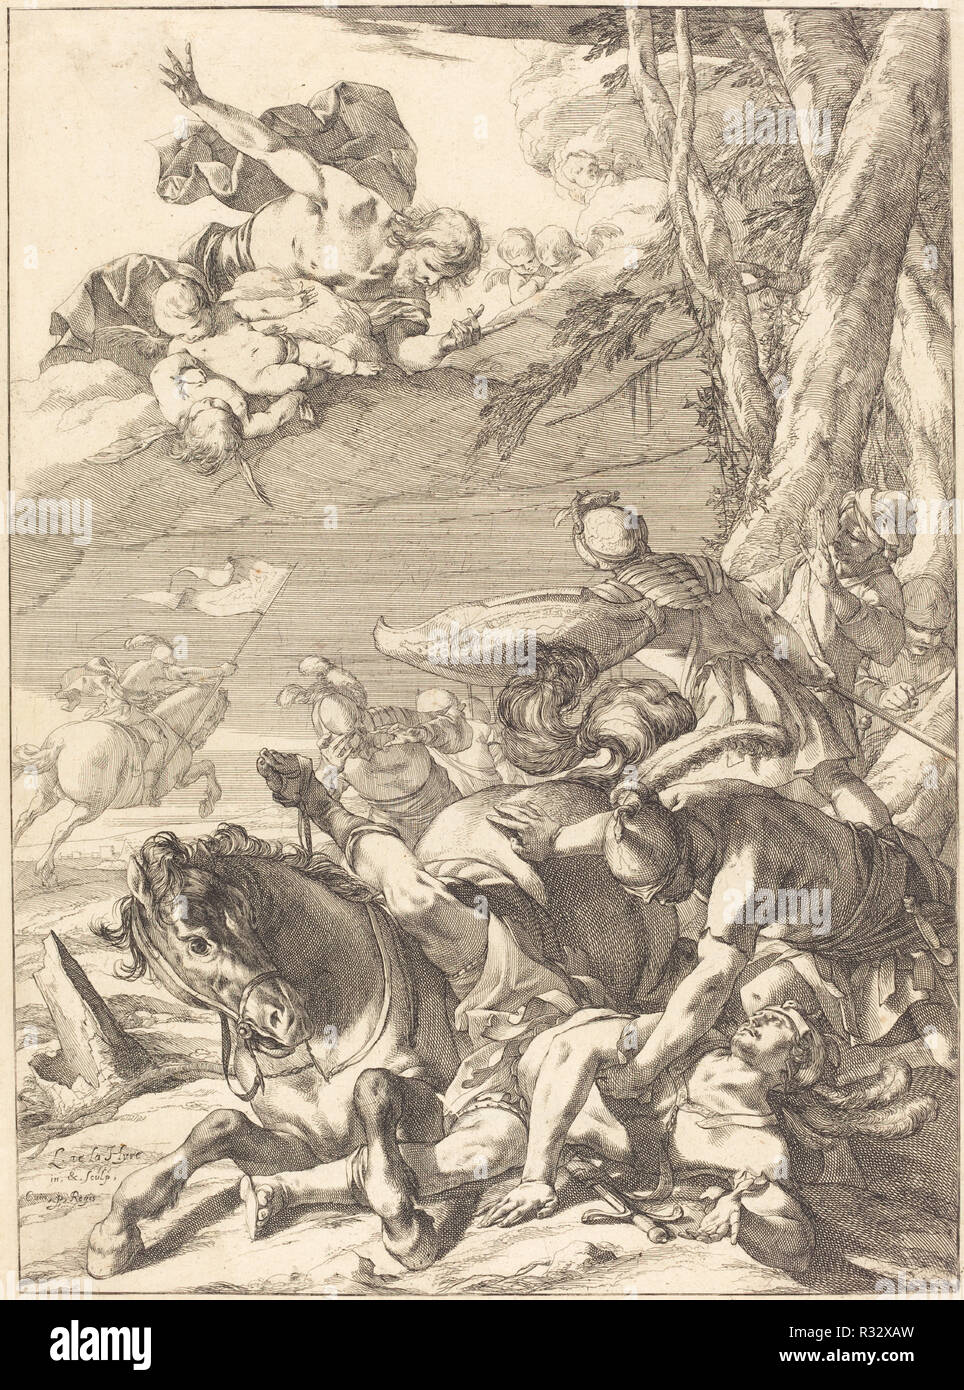 The Conversion of Saint Paul. Dated: c. 1637. Dimensions: sheet (cut to platemark): 41.2 x 30.9 cm (16 1/4 x 12 3/16 in.). Medium: etching on laid paper. Museum: National Gallery of Art, Washington DC. Author: Laurent de La Hyre. Stock Photo